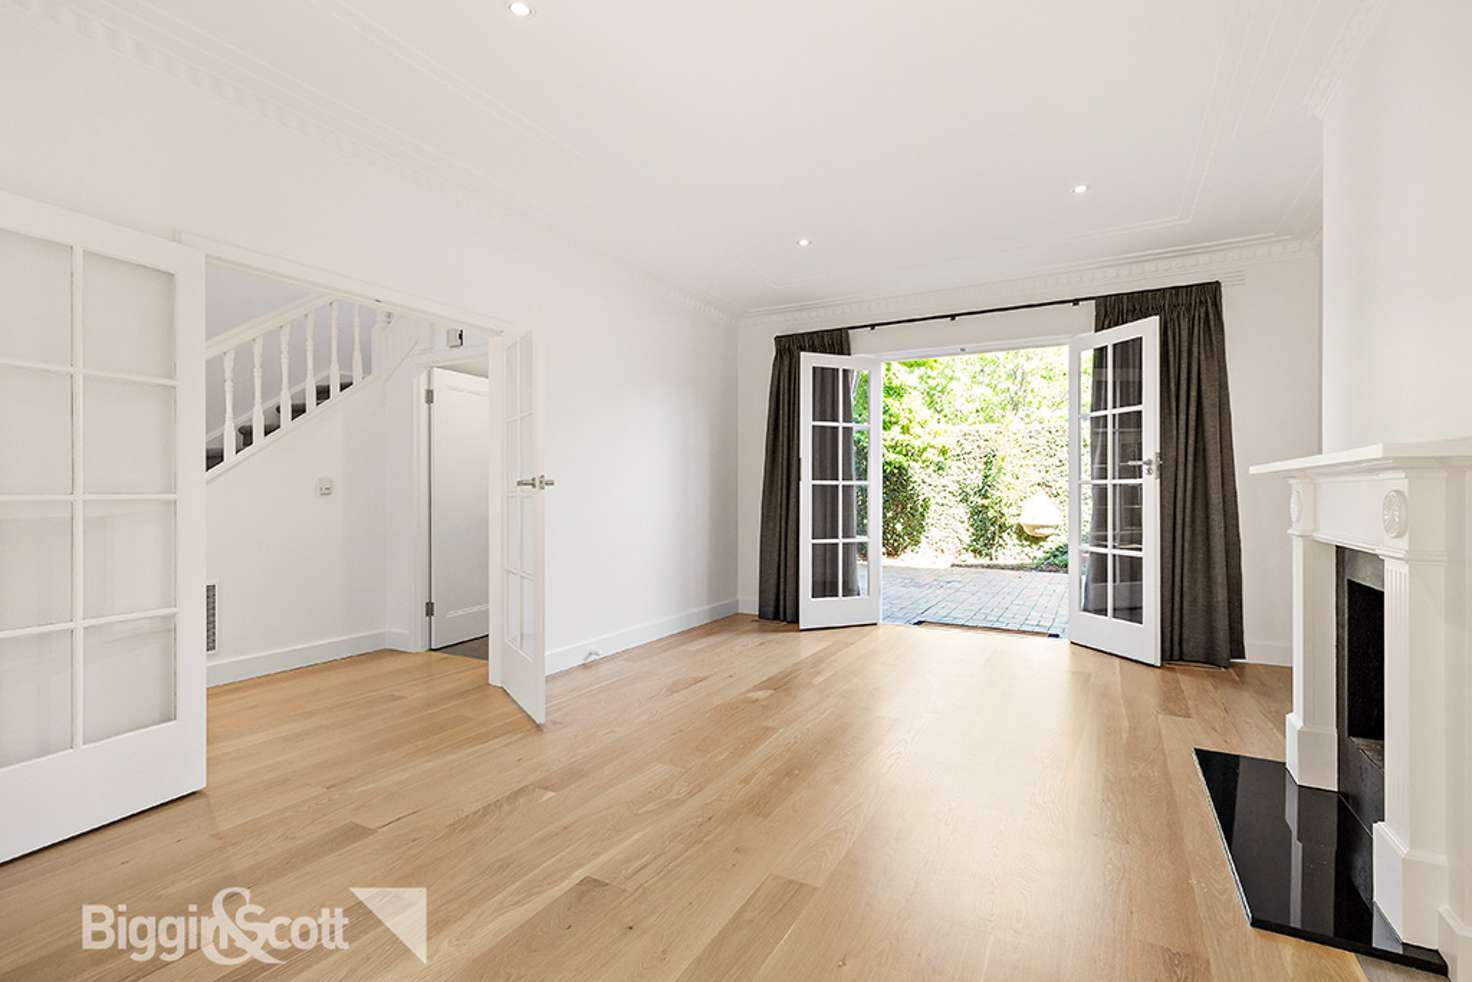 Main view of Homely house listing, 3 Landen Place, Toorak VIC 3142